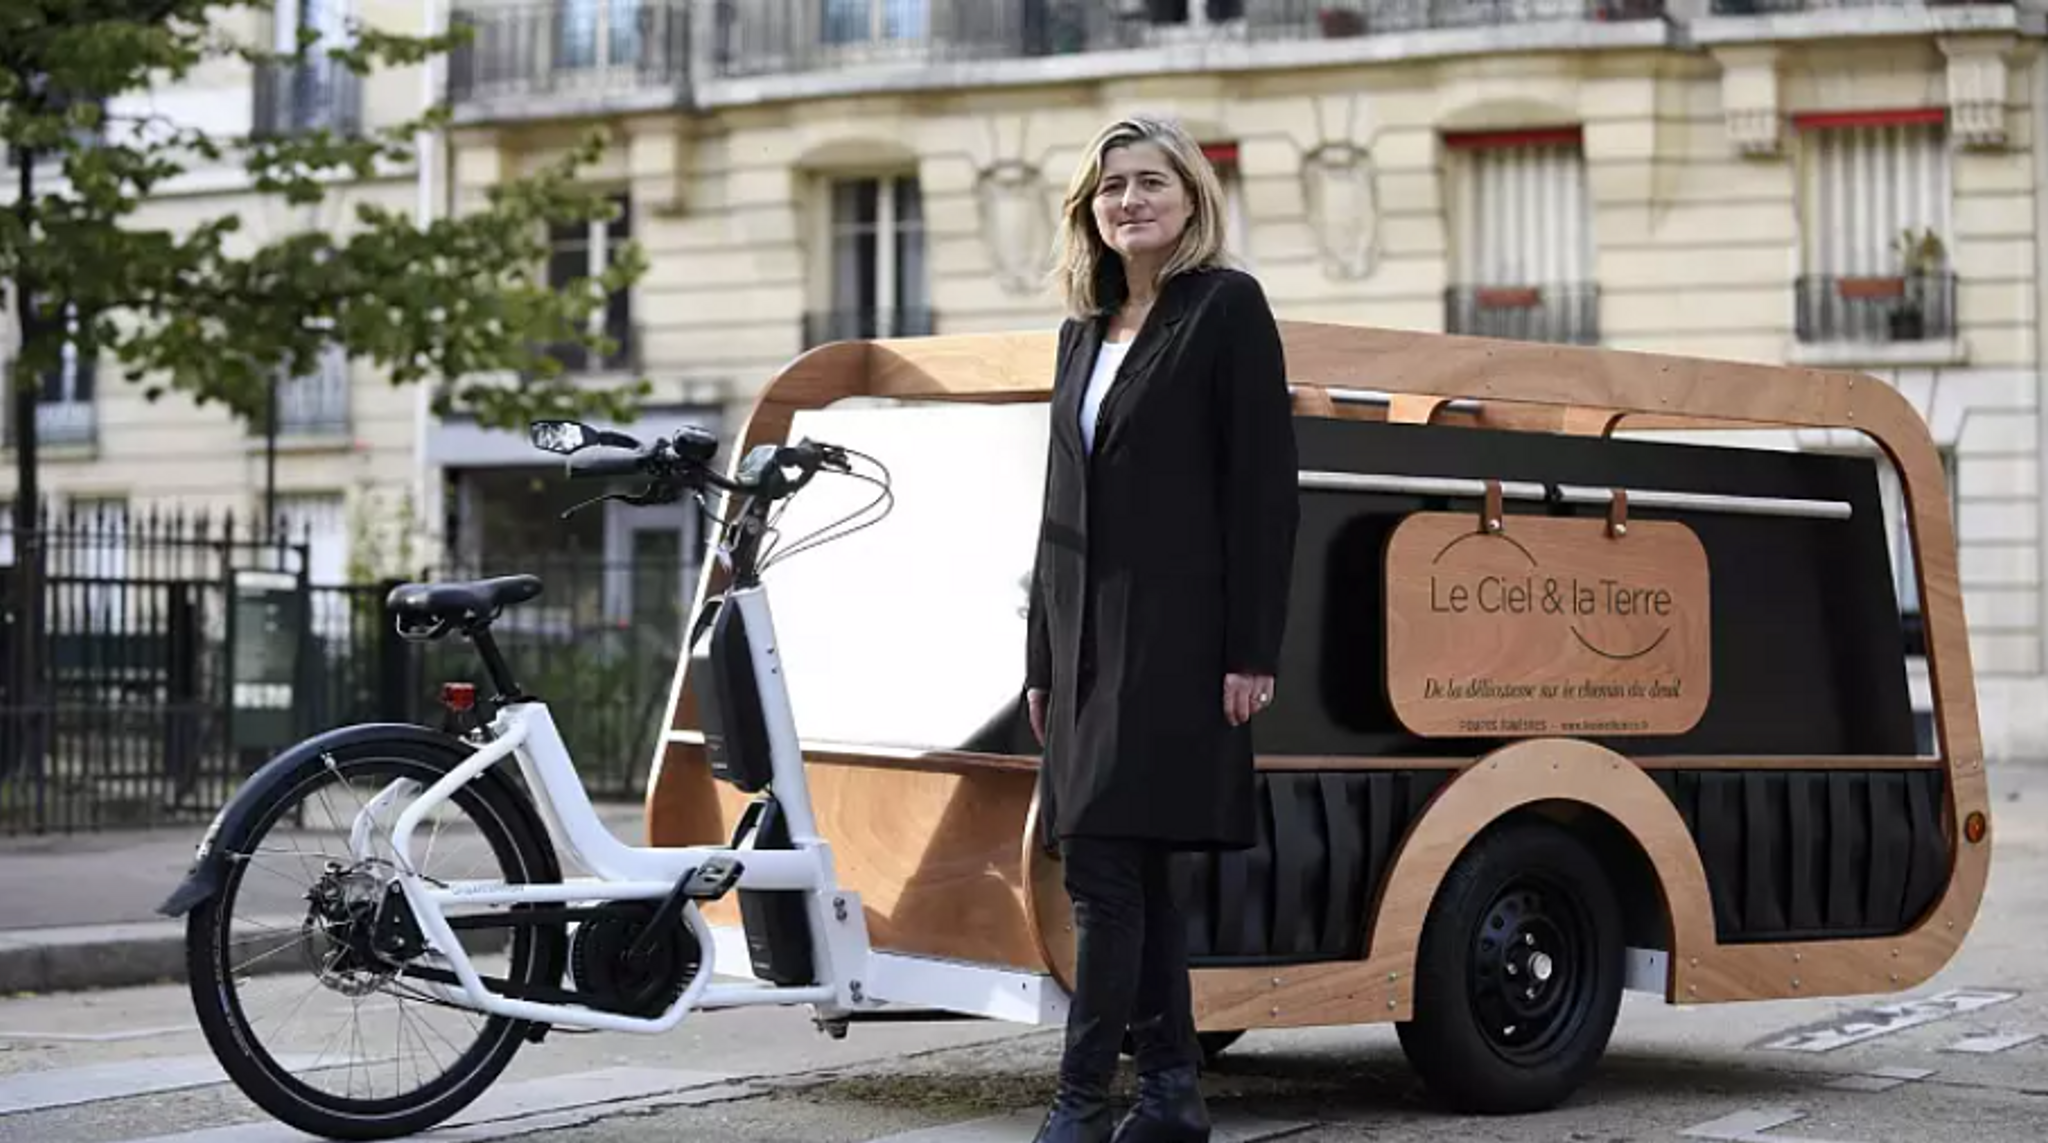 Corbicyclette offers sustainable funerals to Parisians